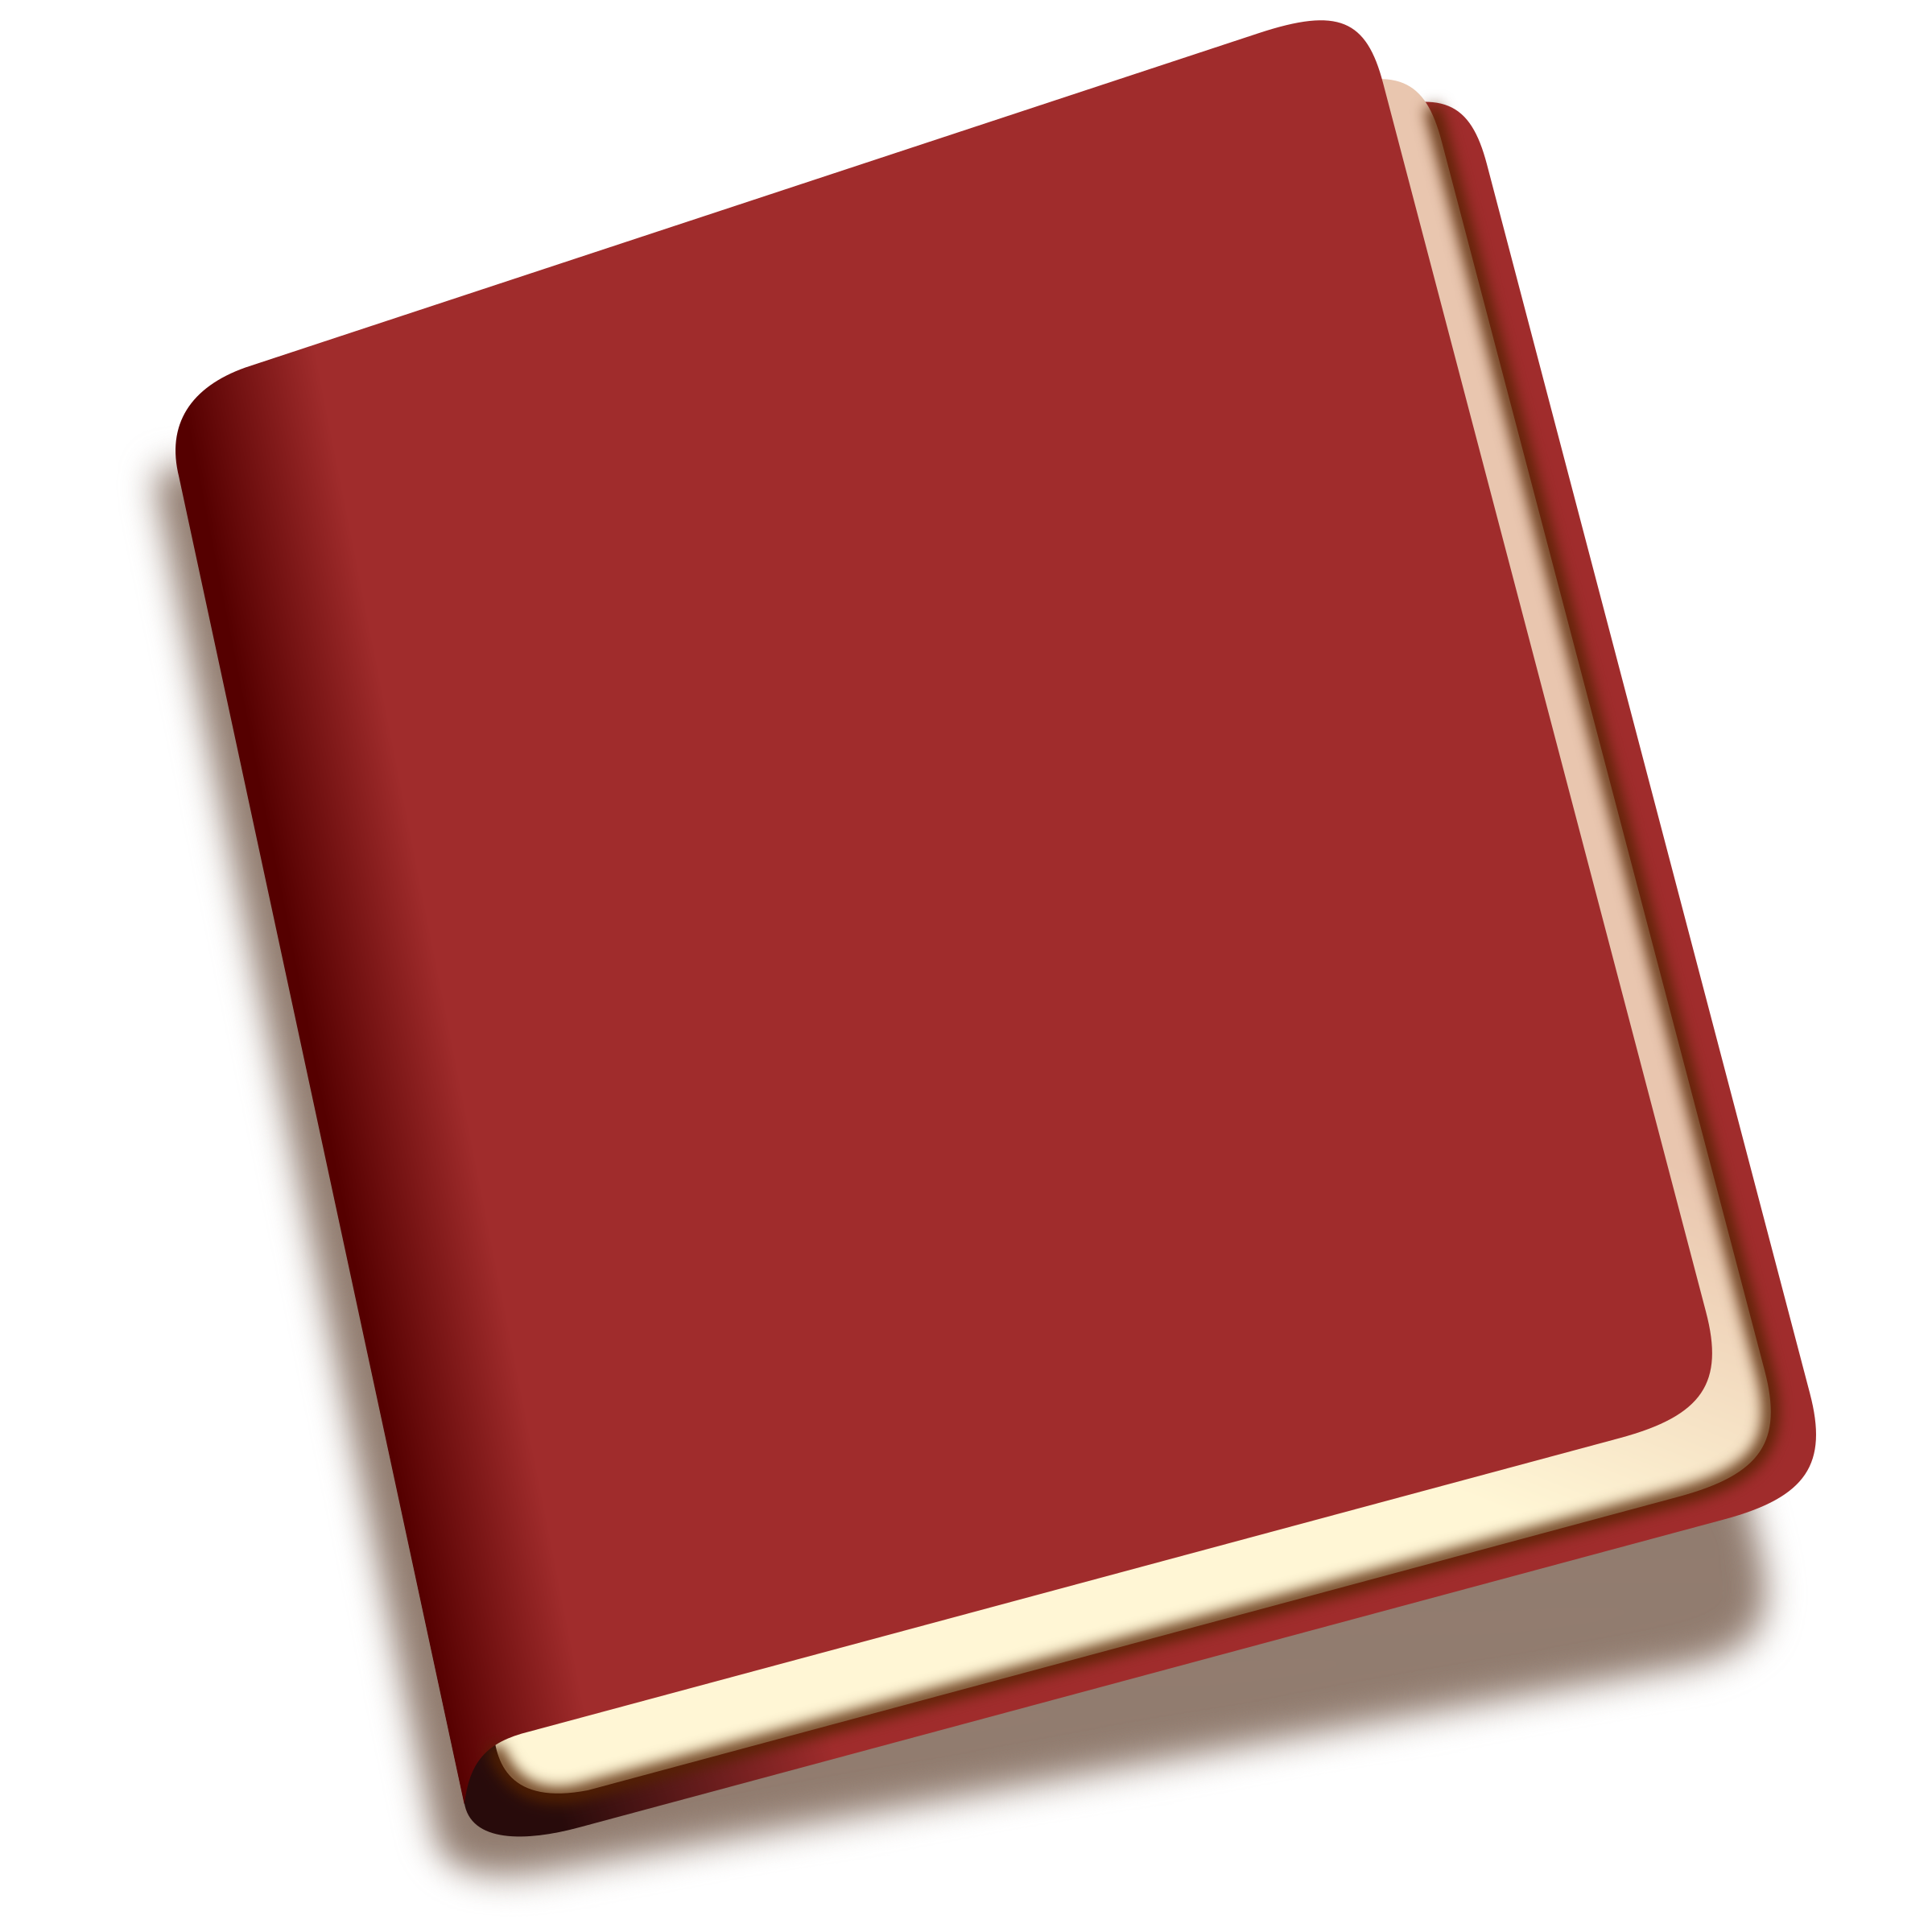 Red Book Icon Vector  Clipart image Free stock photo 